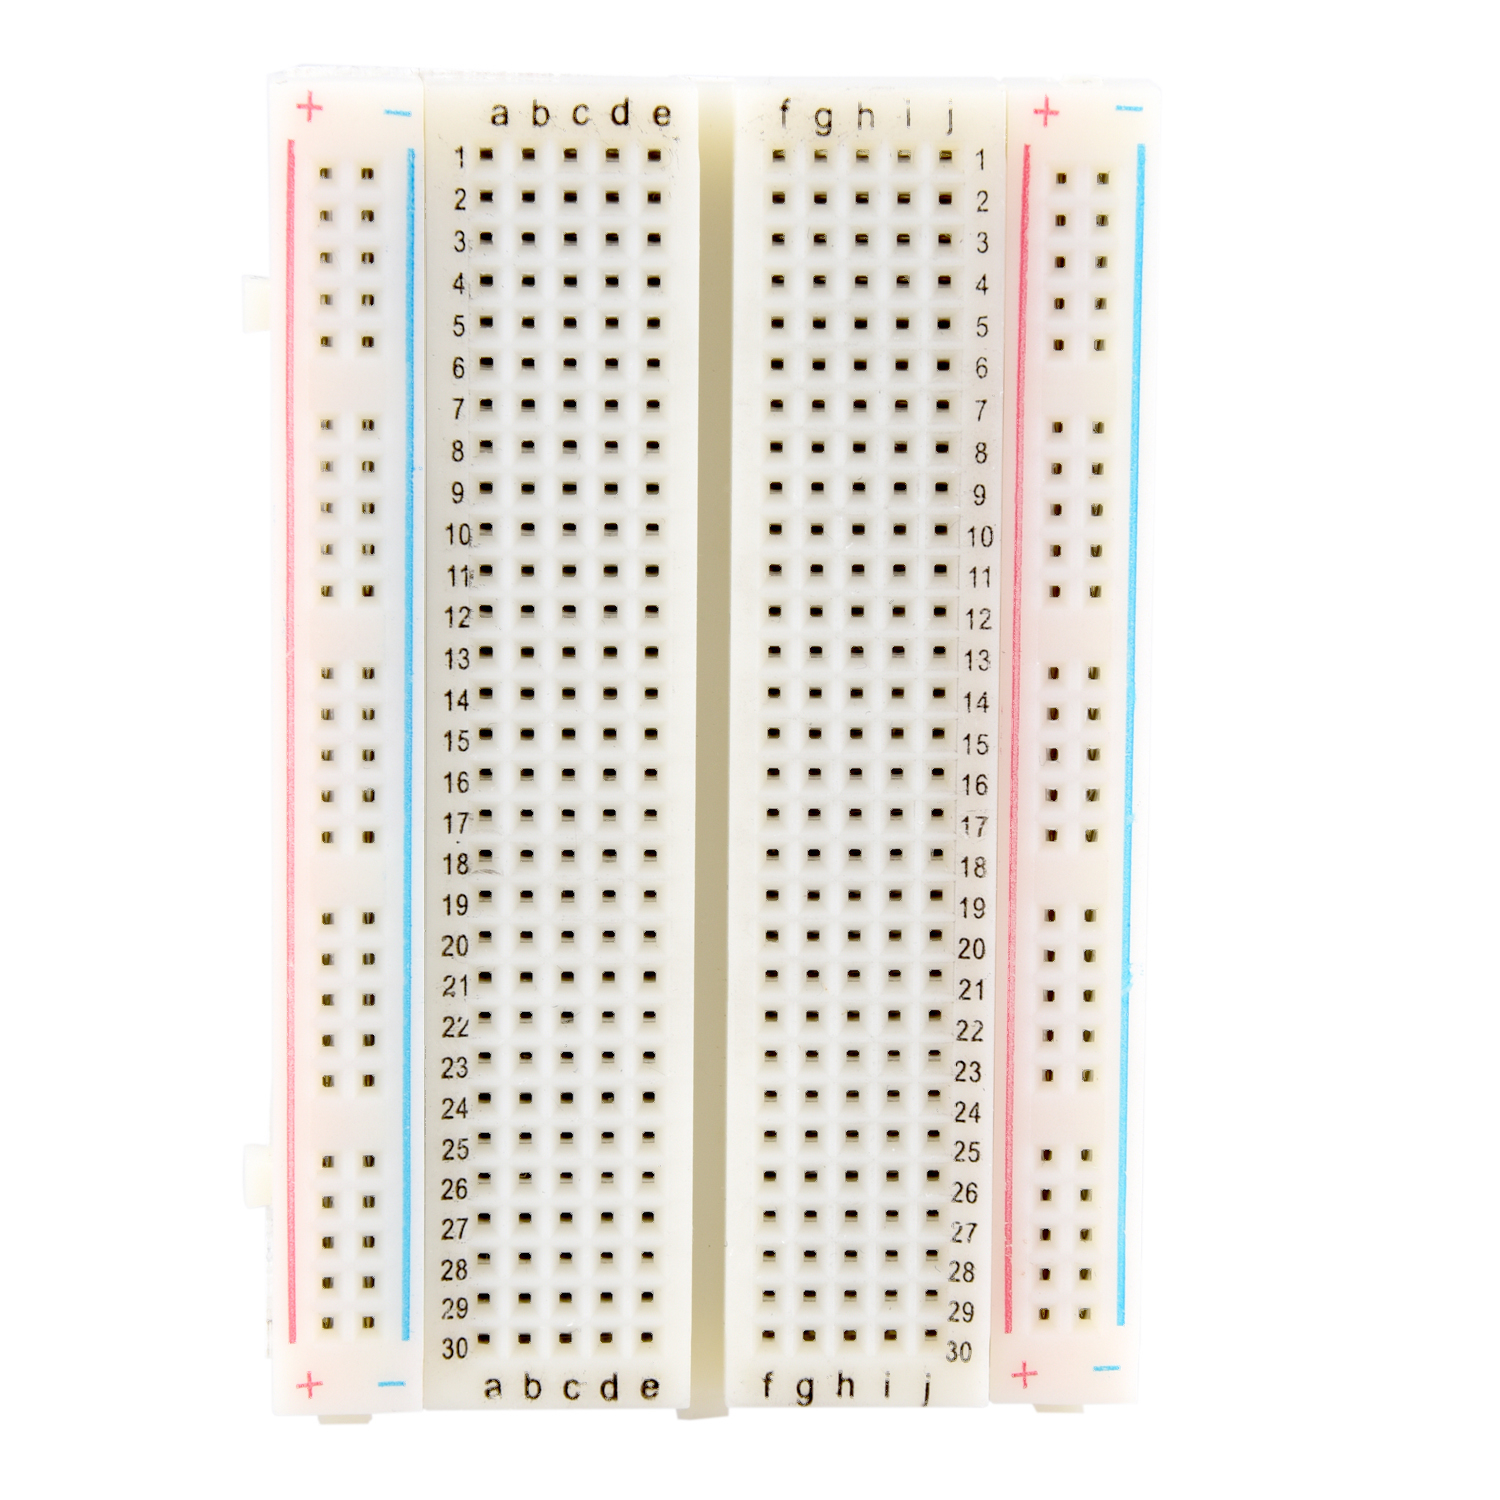 Top quality Breadboard Experiment Board Breadboard 400 Contacts